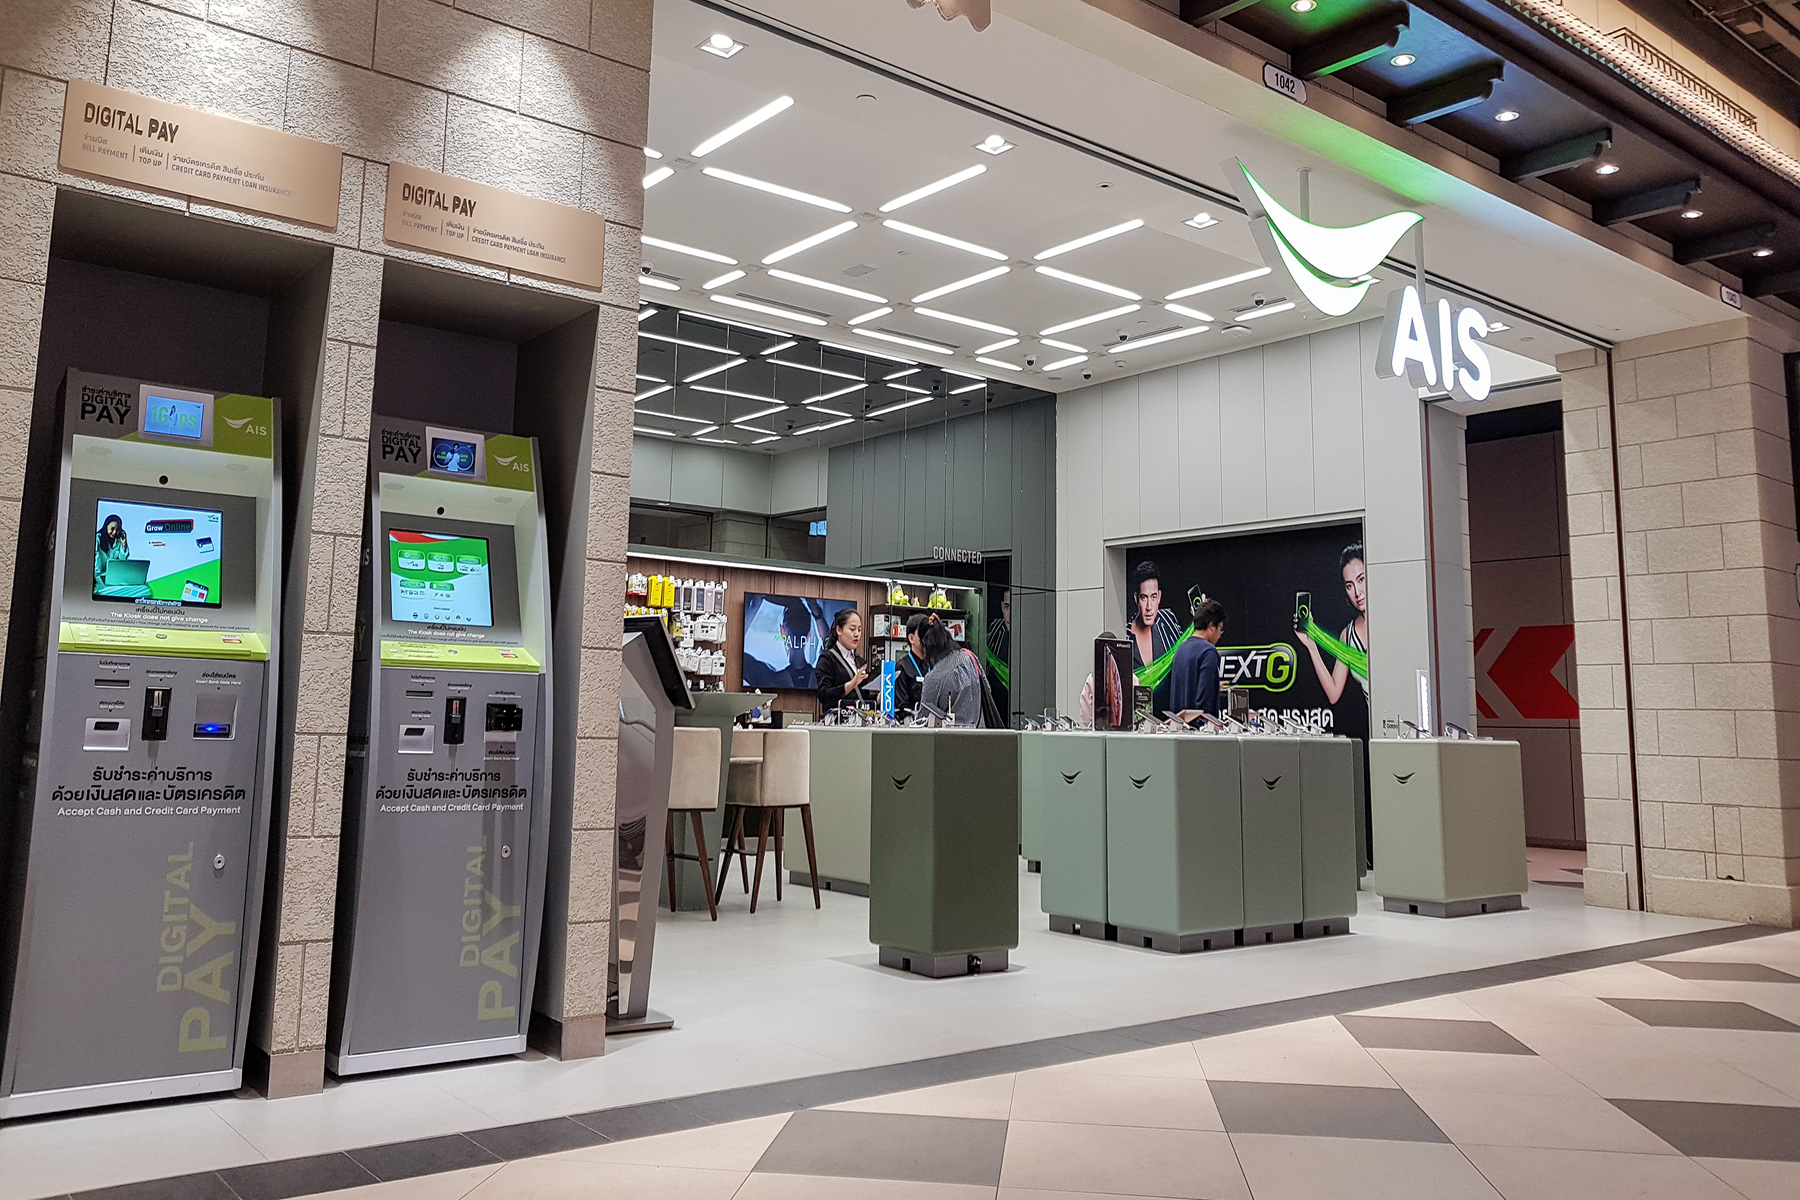 Advance Service Center (AIS Shop) where you can buy SIM cards and mobile phones in Thailand

